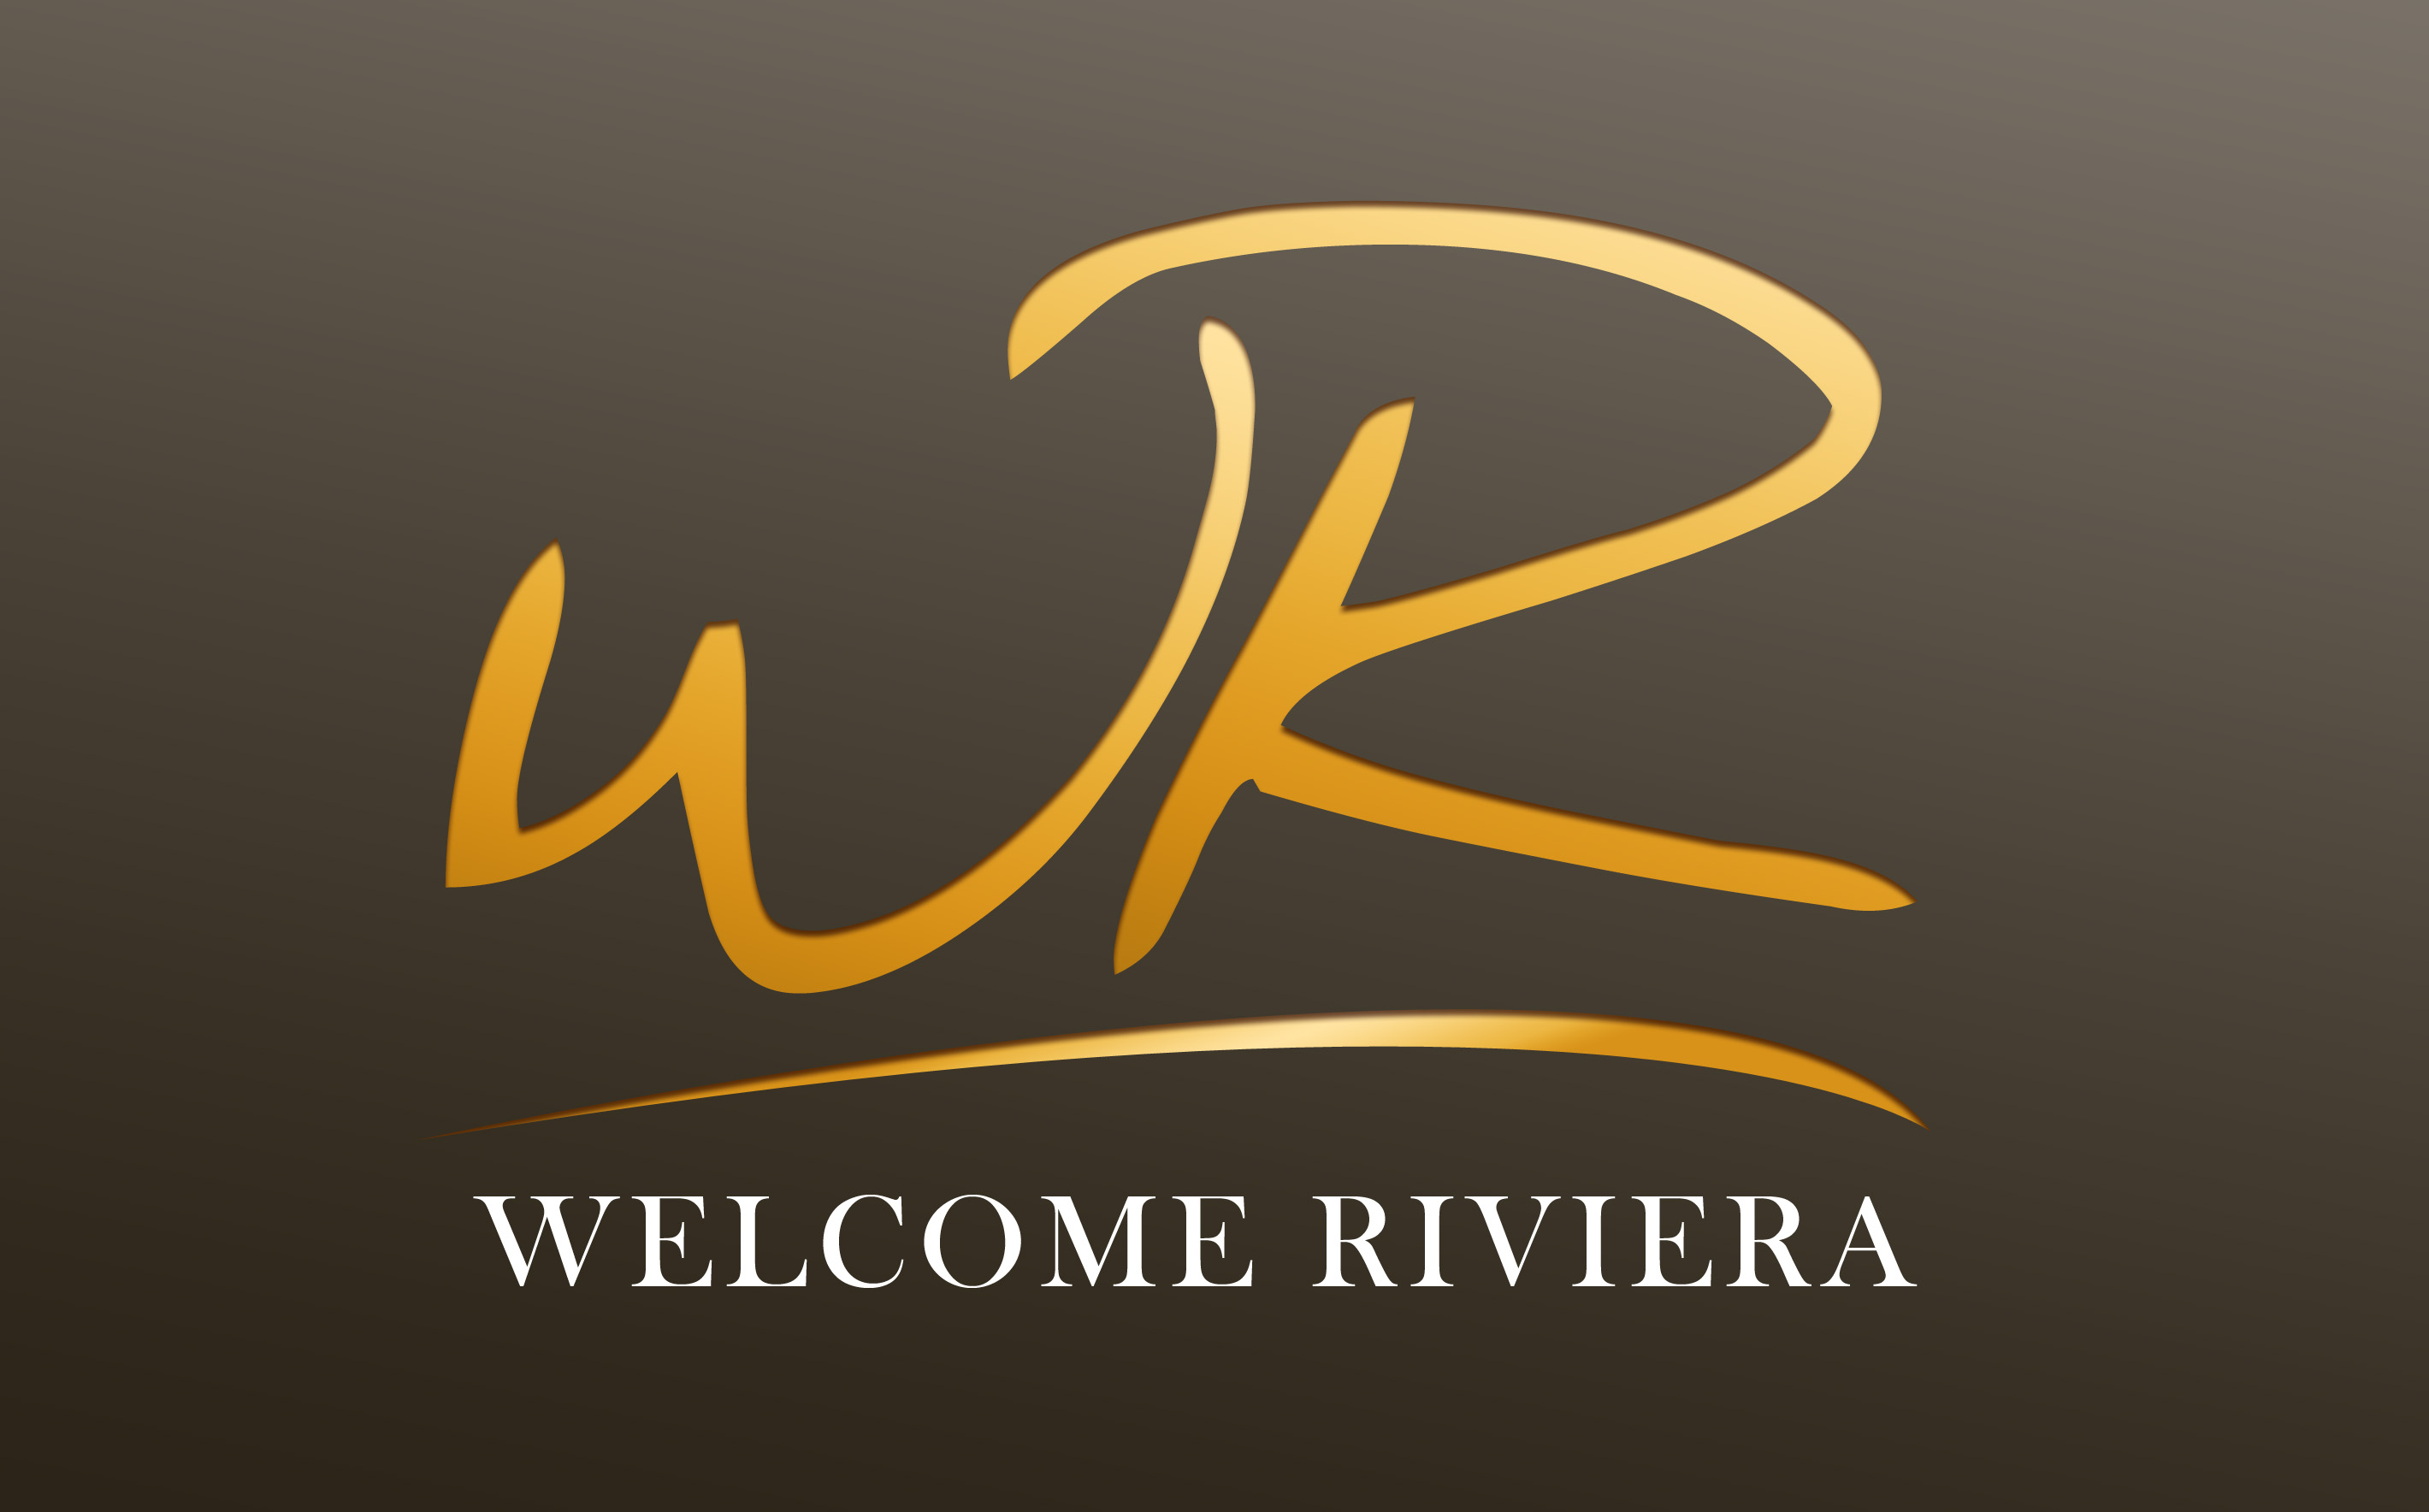 Welcome Riviera